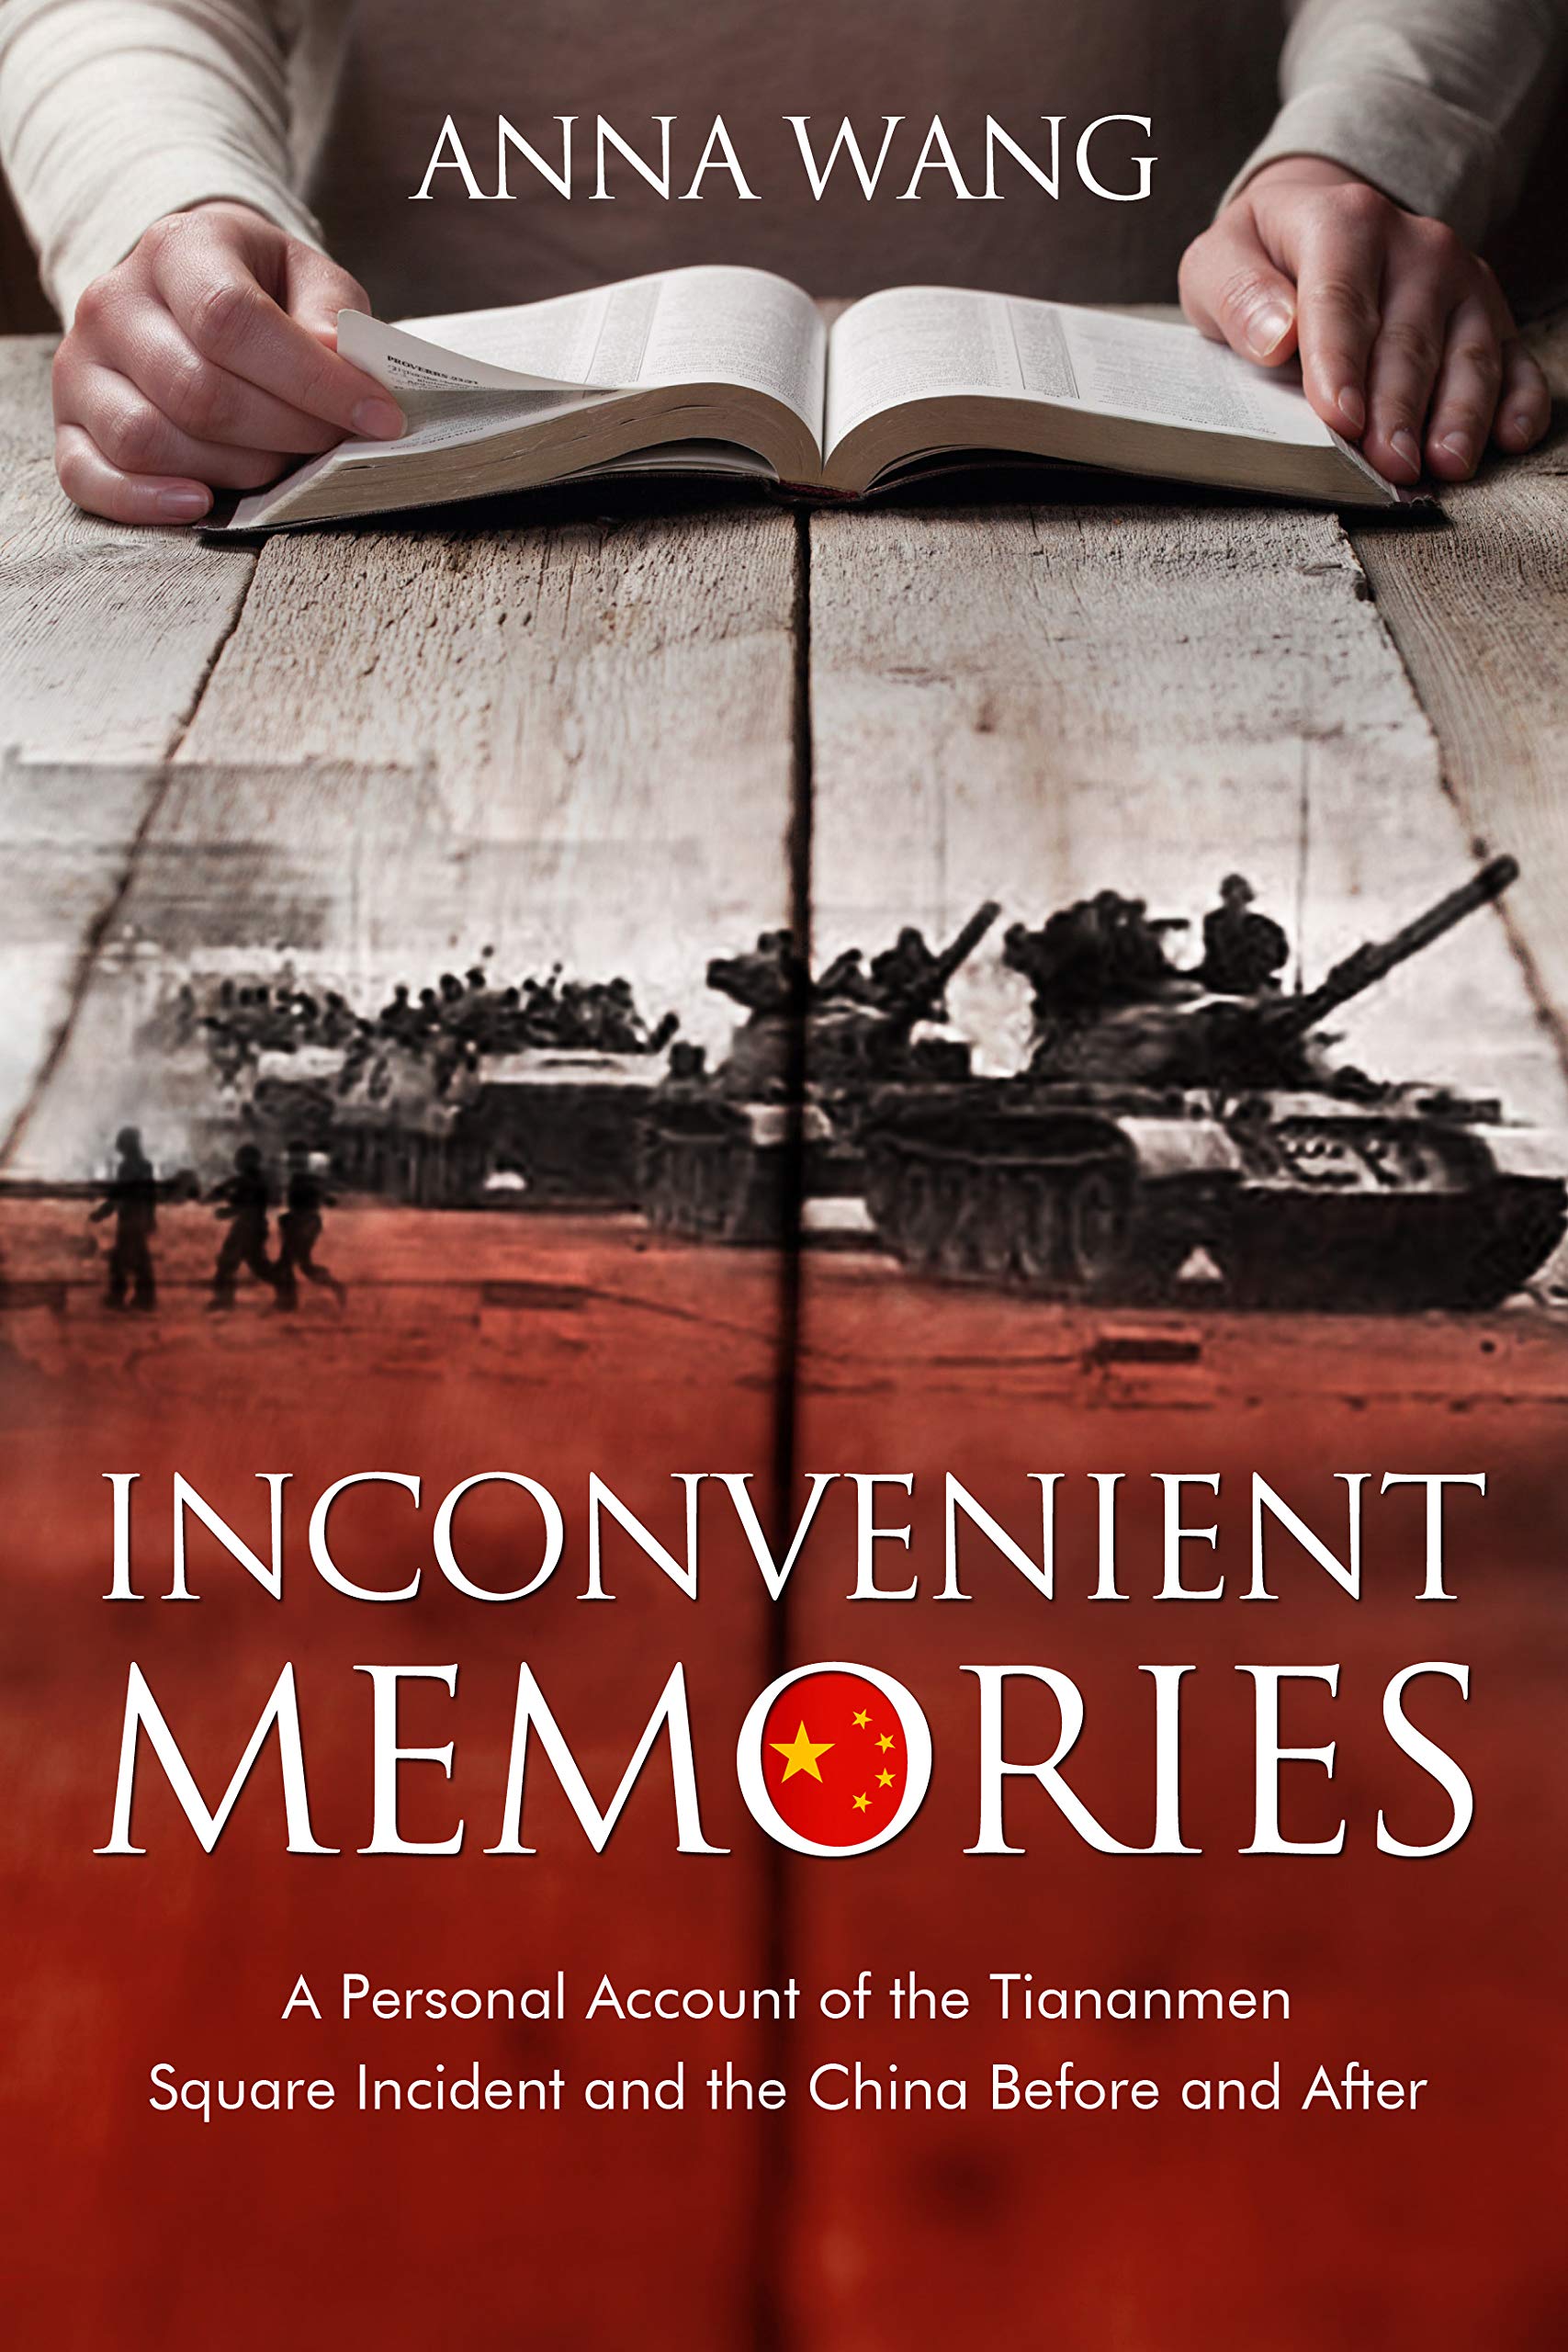 Inconvenient Memories: A Personal Account of the Tiananmen Square Incident and China Before and After